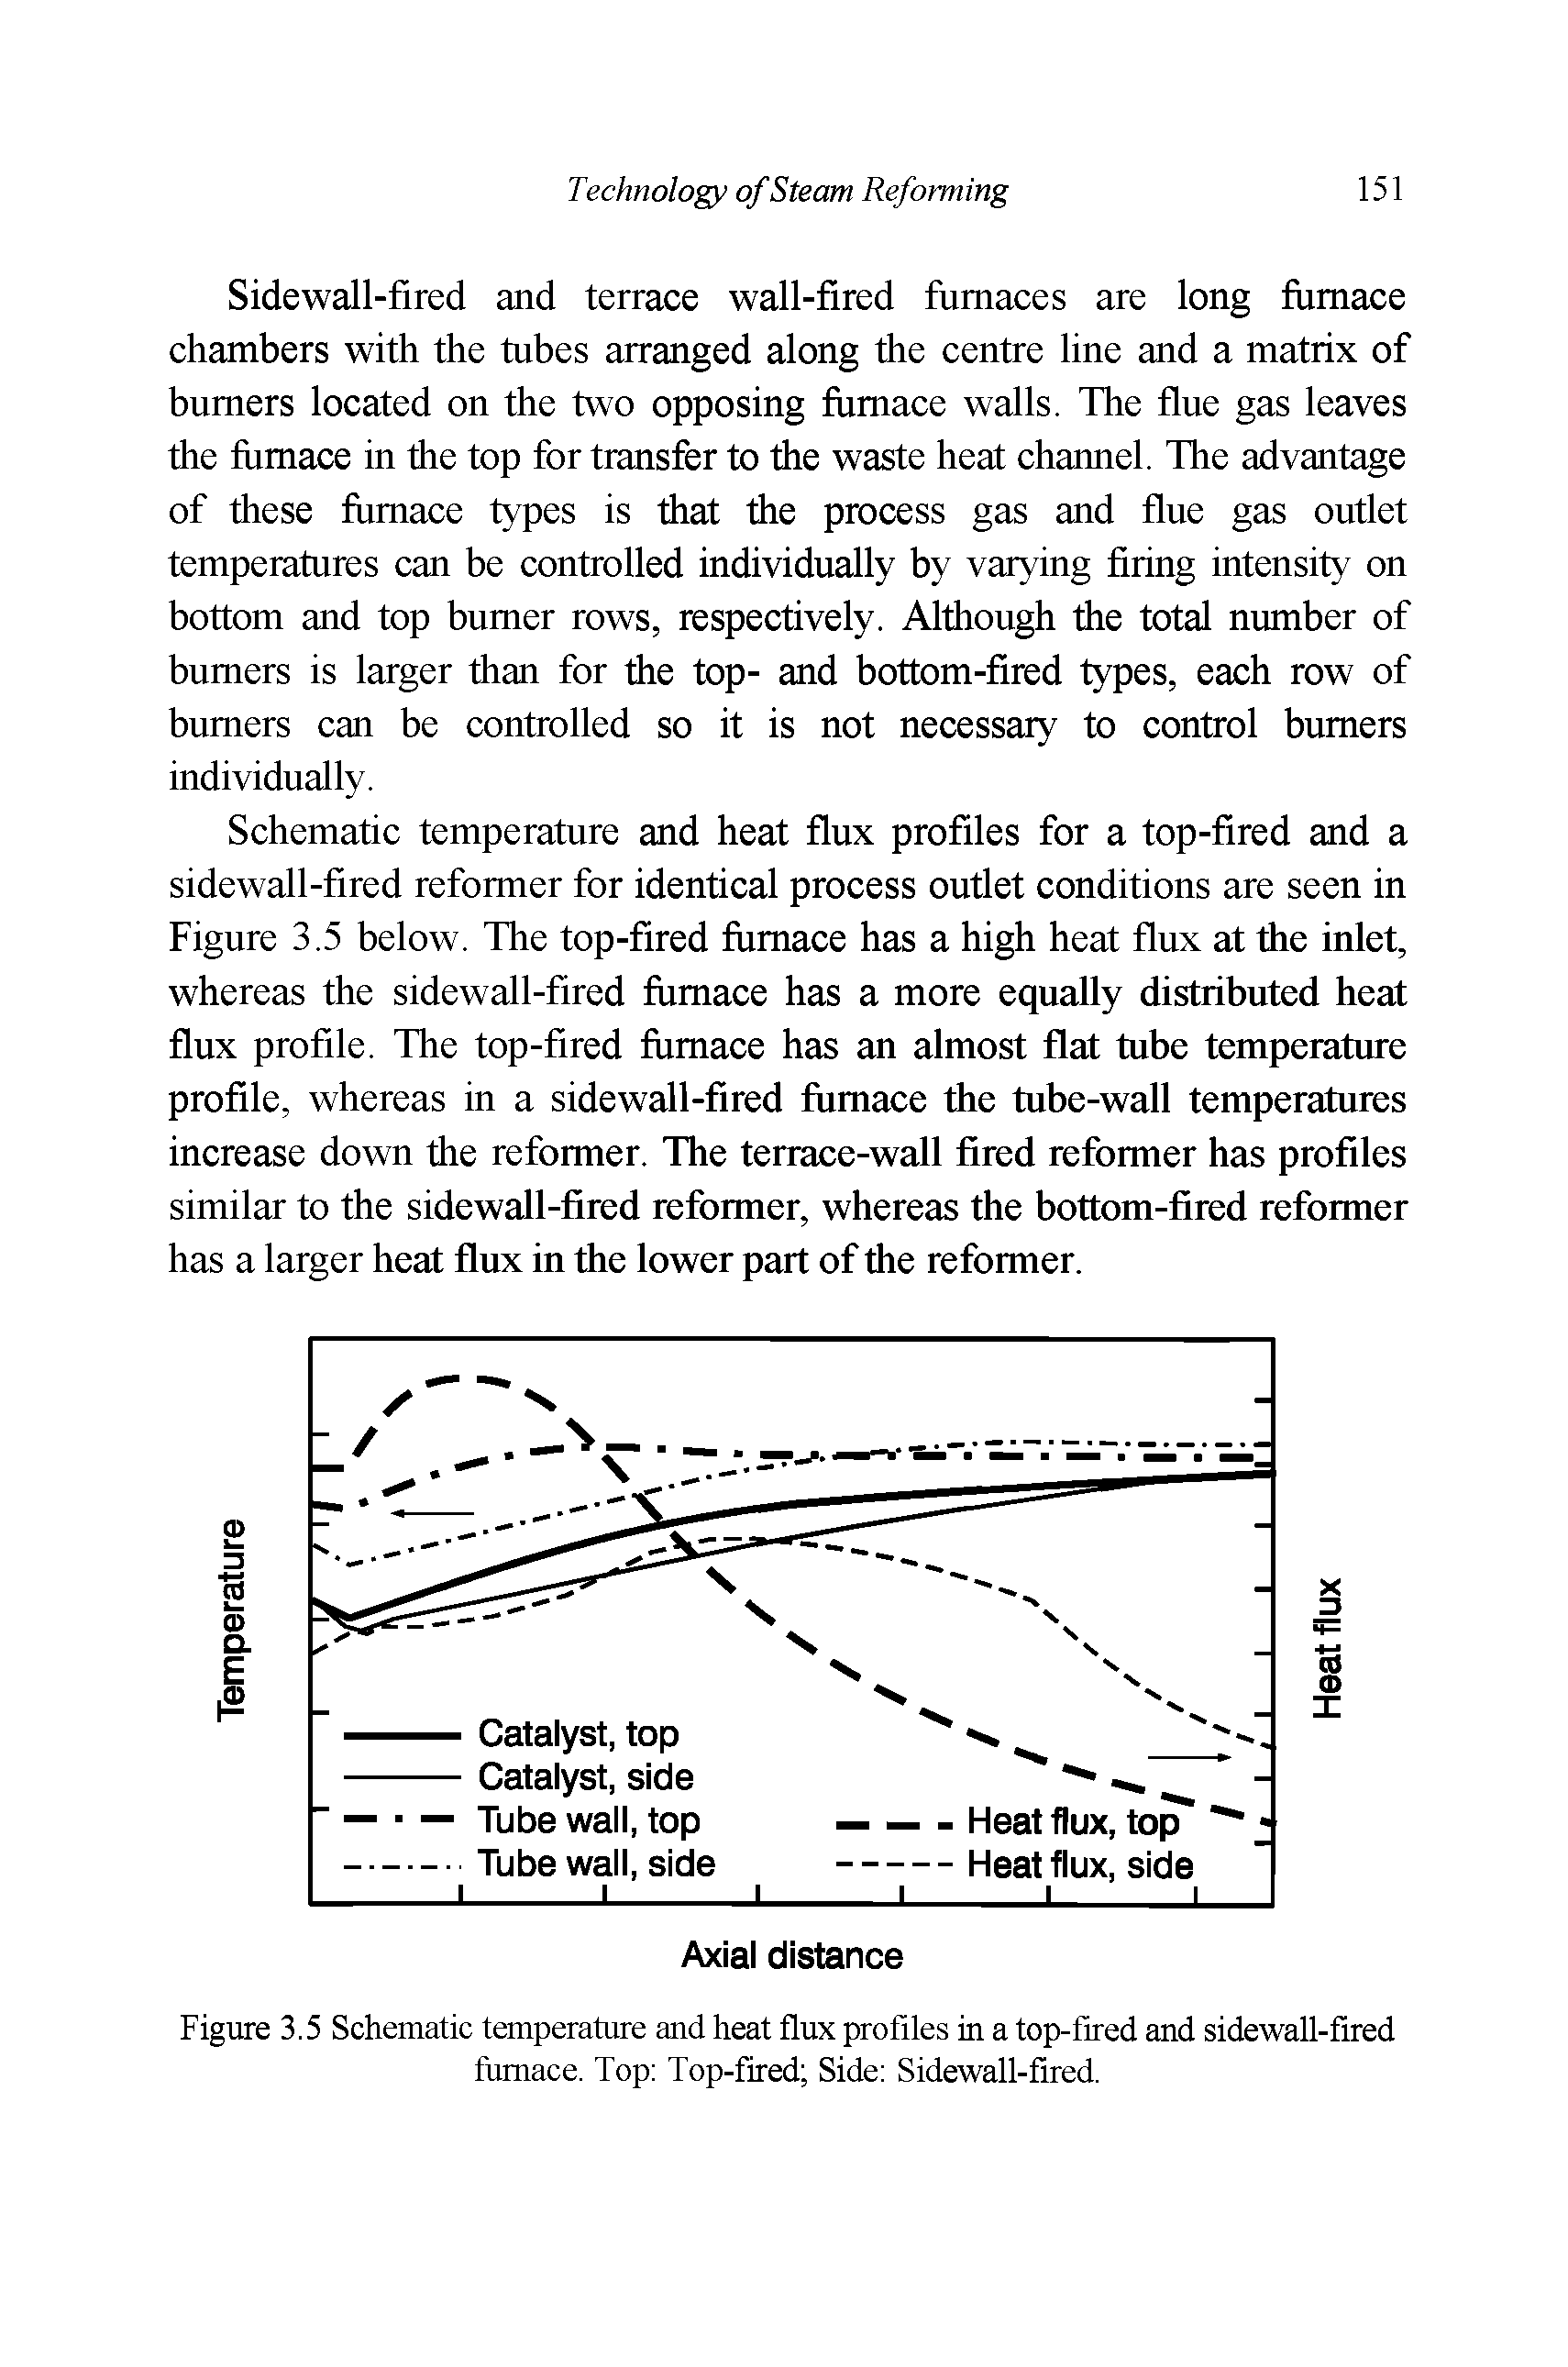 Schematic temperature and heat flux profiles for a top-fired and a sidewall-fired reformer for identical process outlet conditions are seen in Figure 3.5 below. The top-fired furnace has a high heat flux at the inlet, whereas the sidewall-fired furnace has a more equally distributed heat flux profile. The top-fired furnace has an almost flat tube temperature profile, whereas in a sidewall-fired furnace the tube-wall temperatures increase down the reformer. The terrace-wall fired reformer has profiles similar to the sidewall-fired reformer, whereas the bottom-fired reformer has a larger heat flux in the lower part of the reformer.